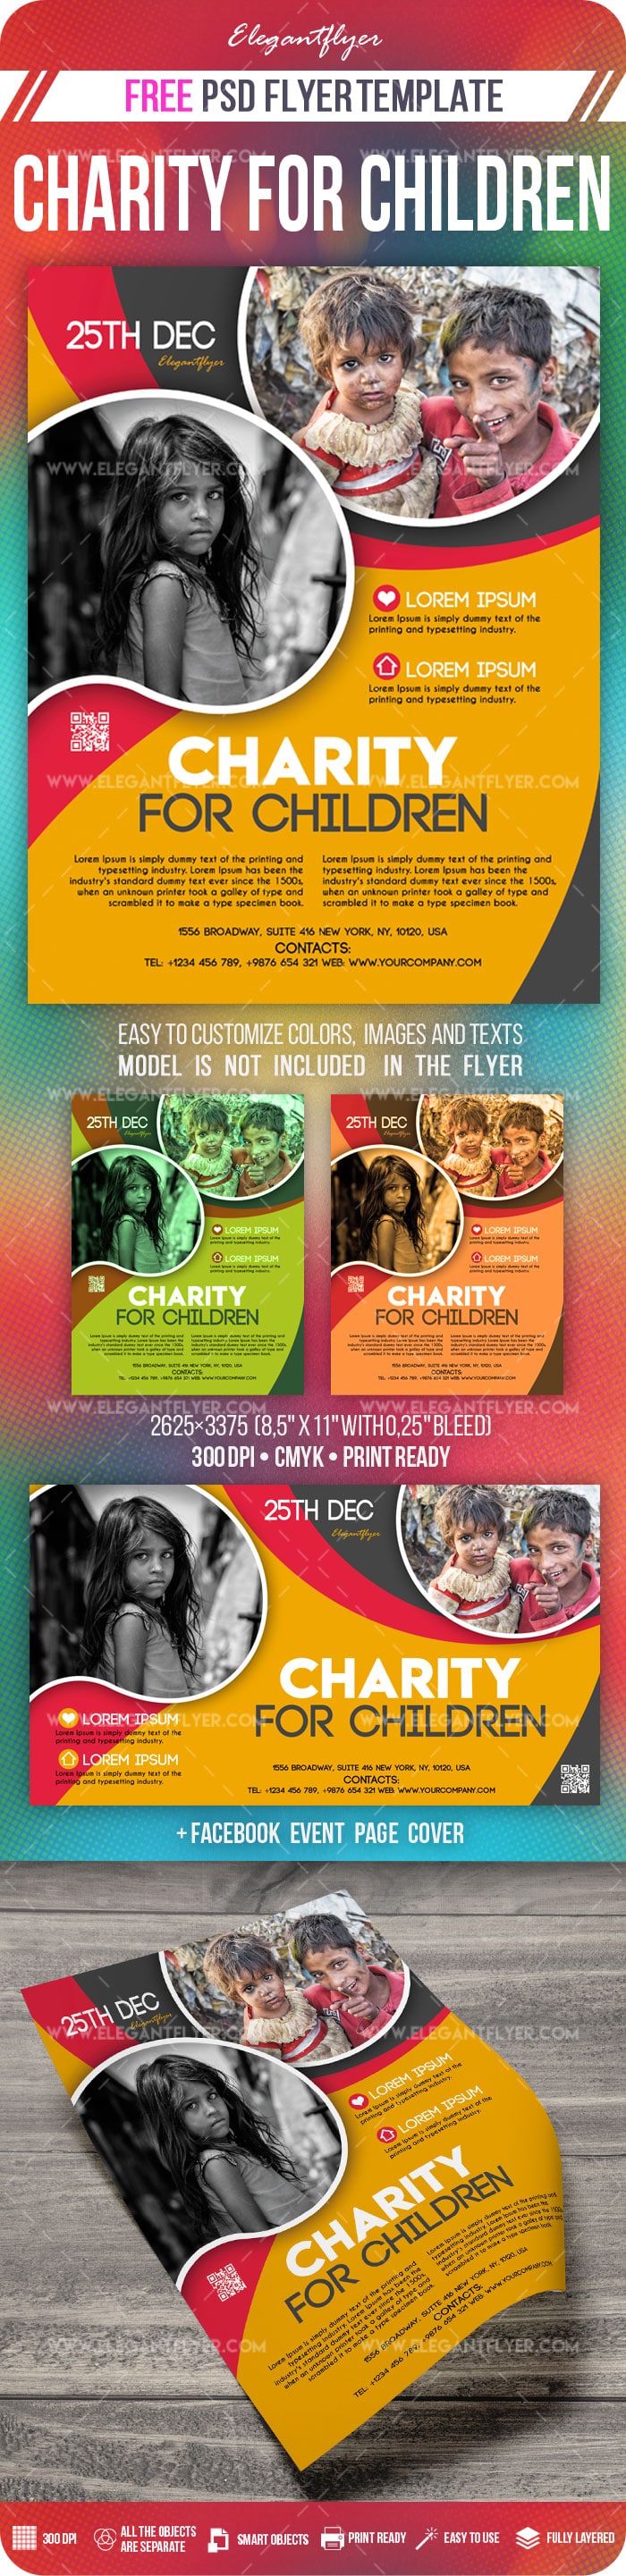 Charity for children free flyer PSD